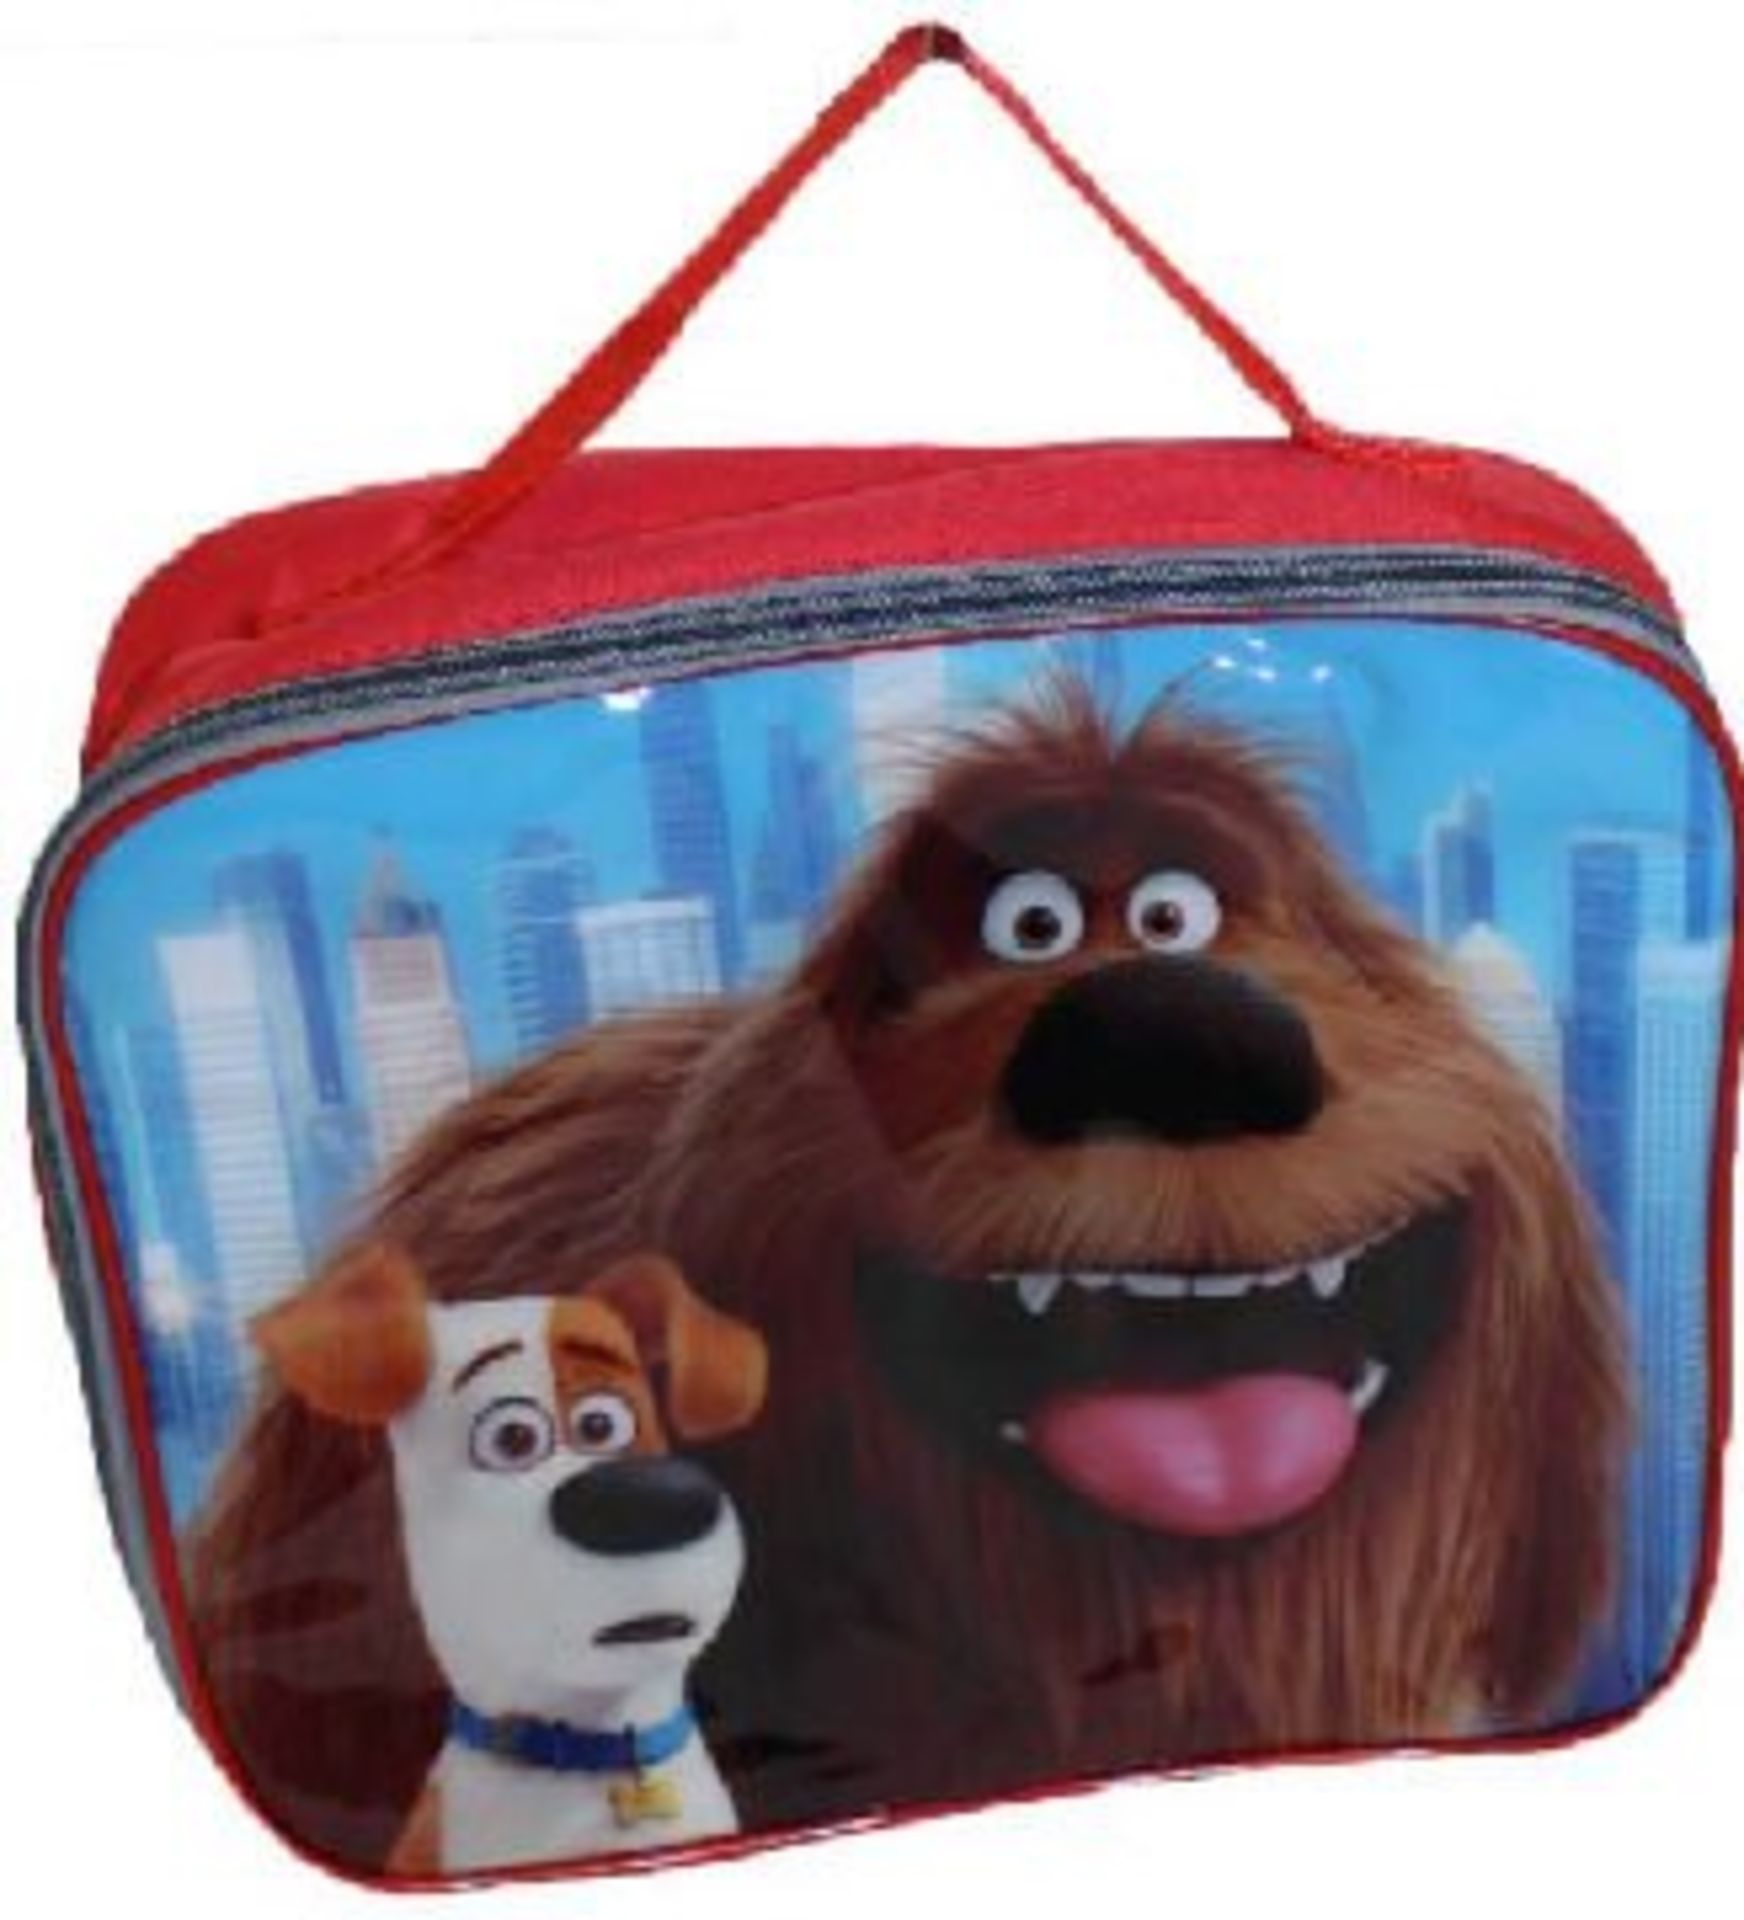 96 X Secret Life Of Pets Insulated Lunch Bag School Snack Box Boys Girls Cooler [Brand New In Retail